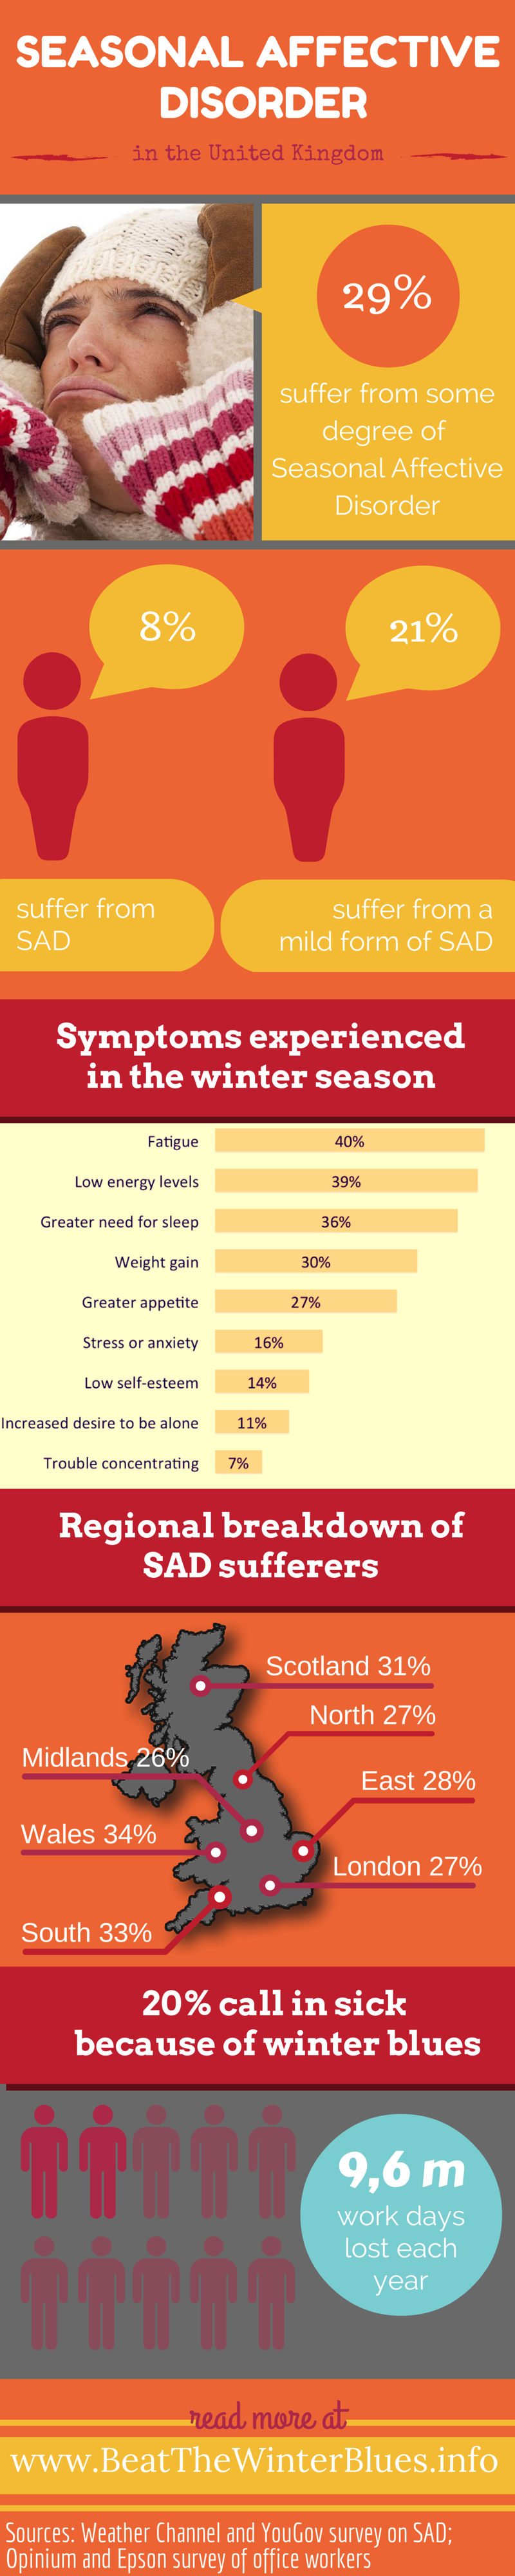 Infographic: Seasonal Affective Disorder in the United Kingdom